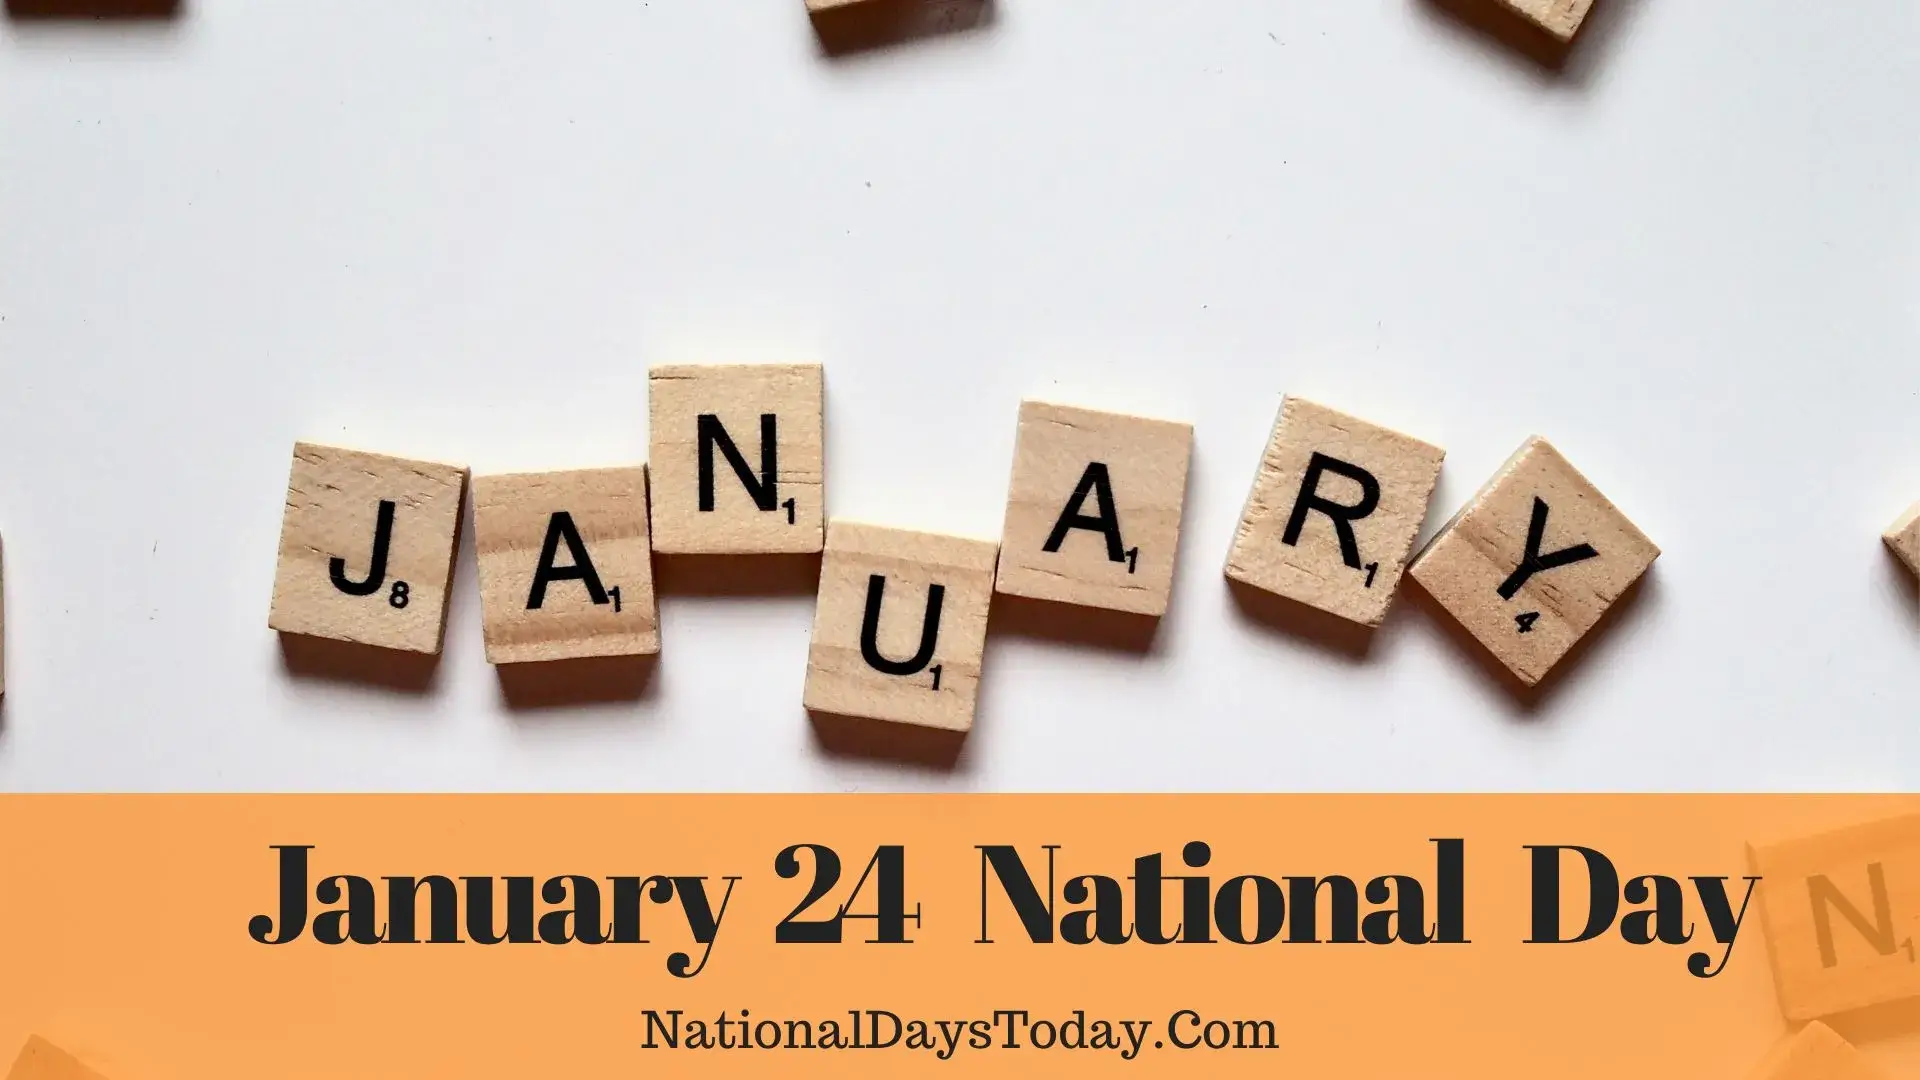 January 24 National Day